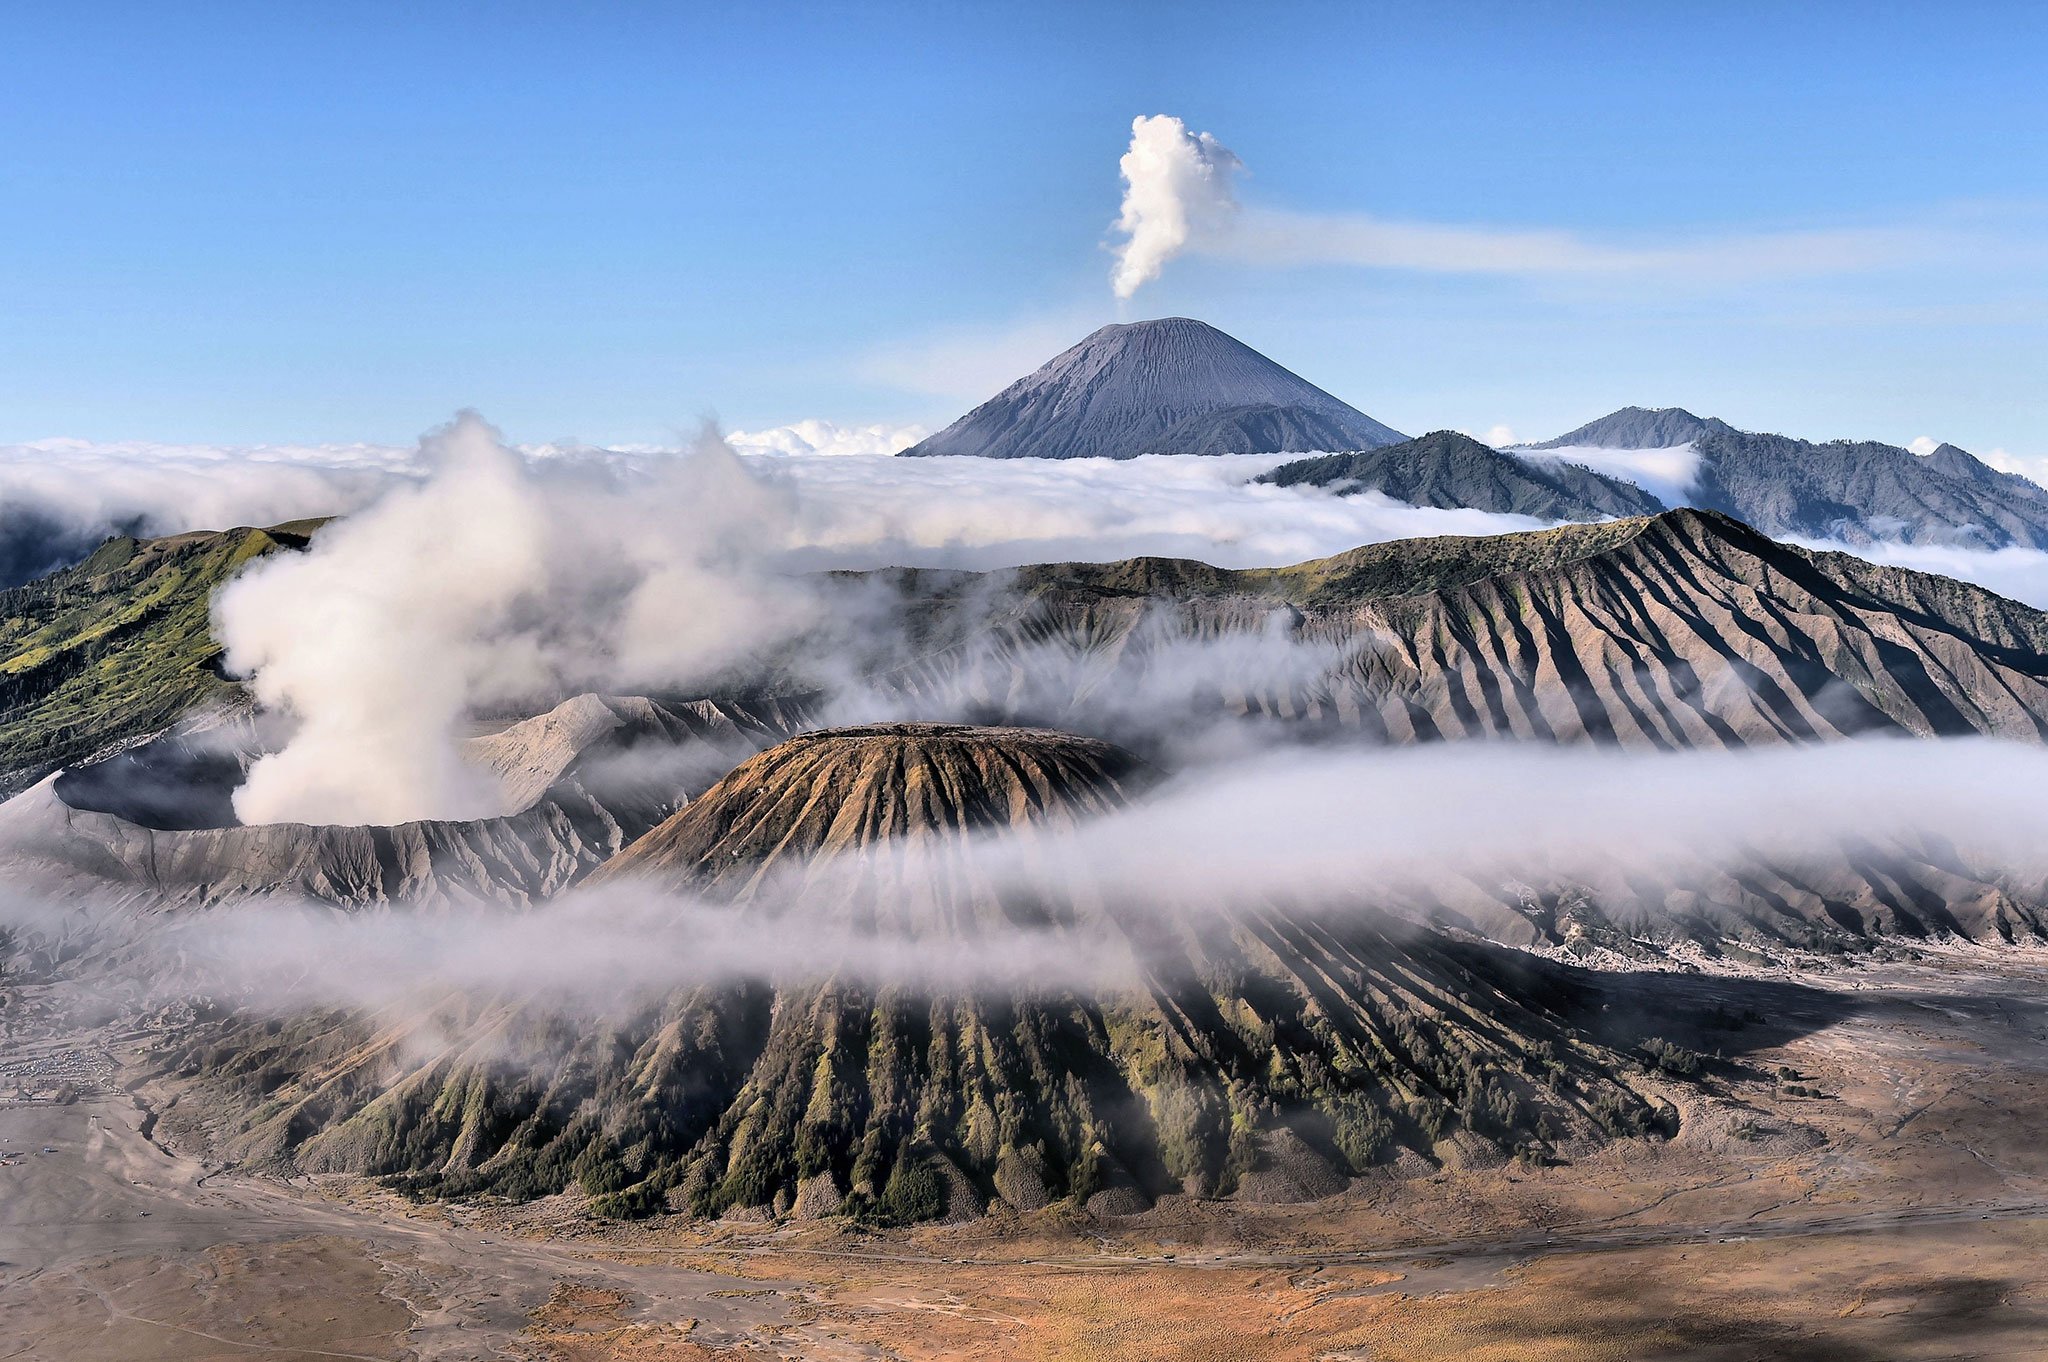 Bromo 4K wallpapers for your desktop or mobile screen free and easy to